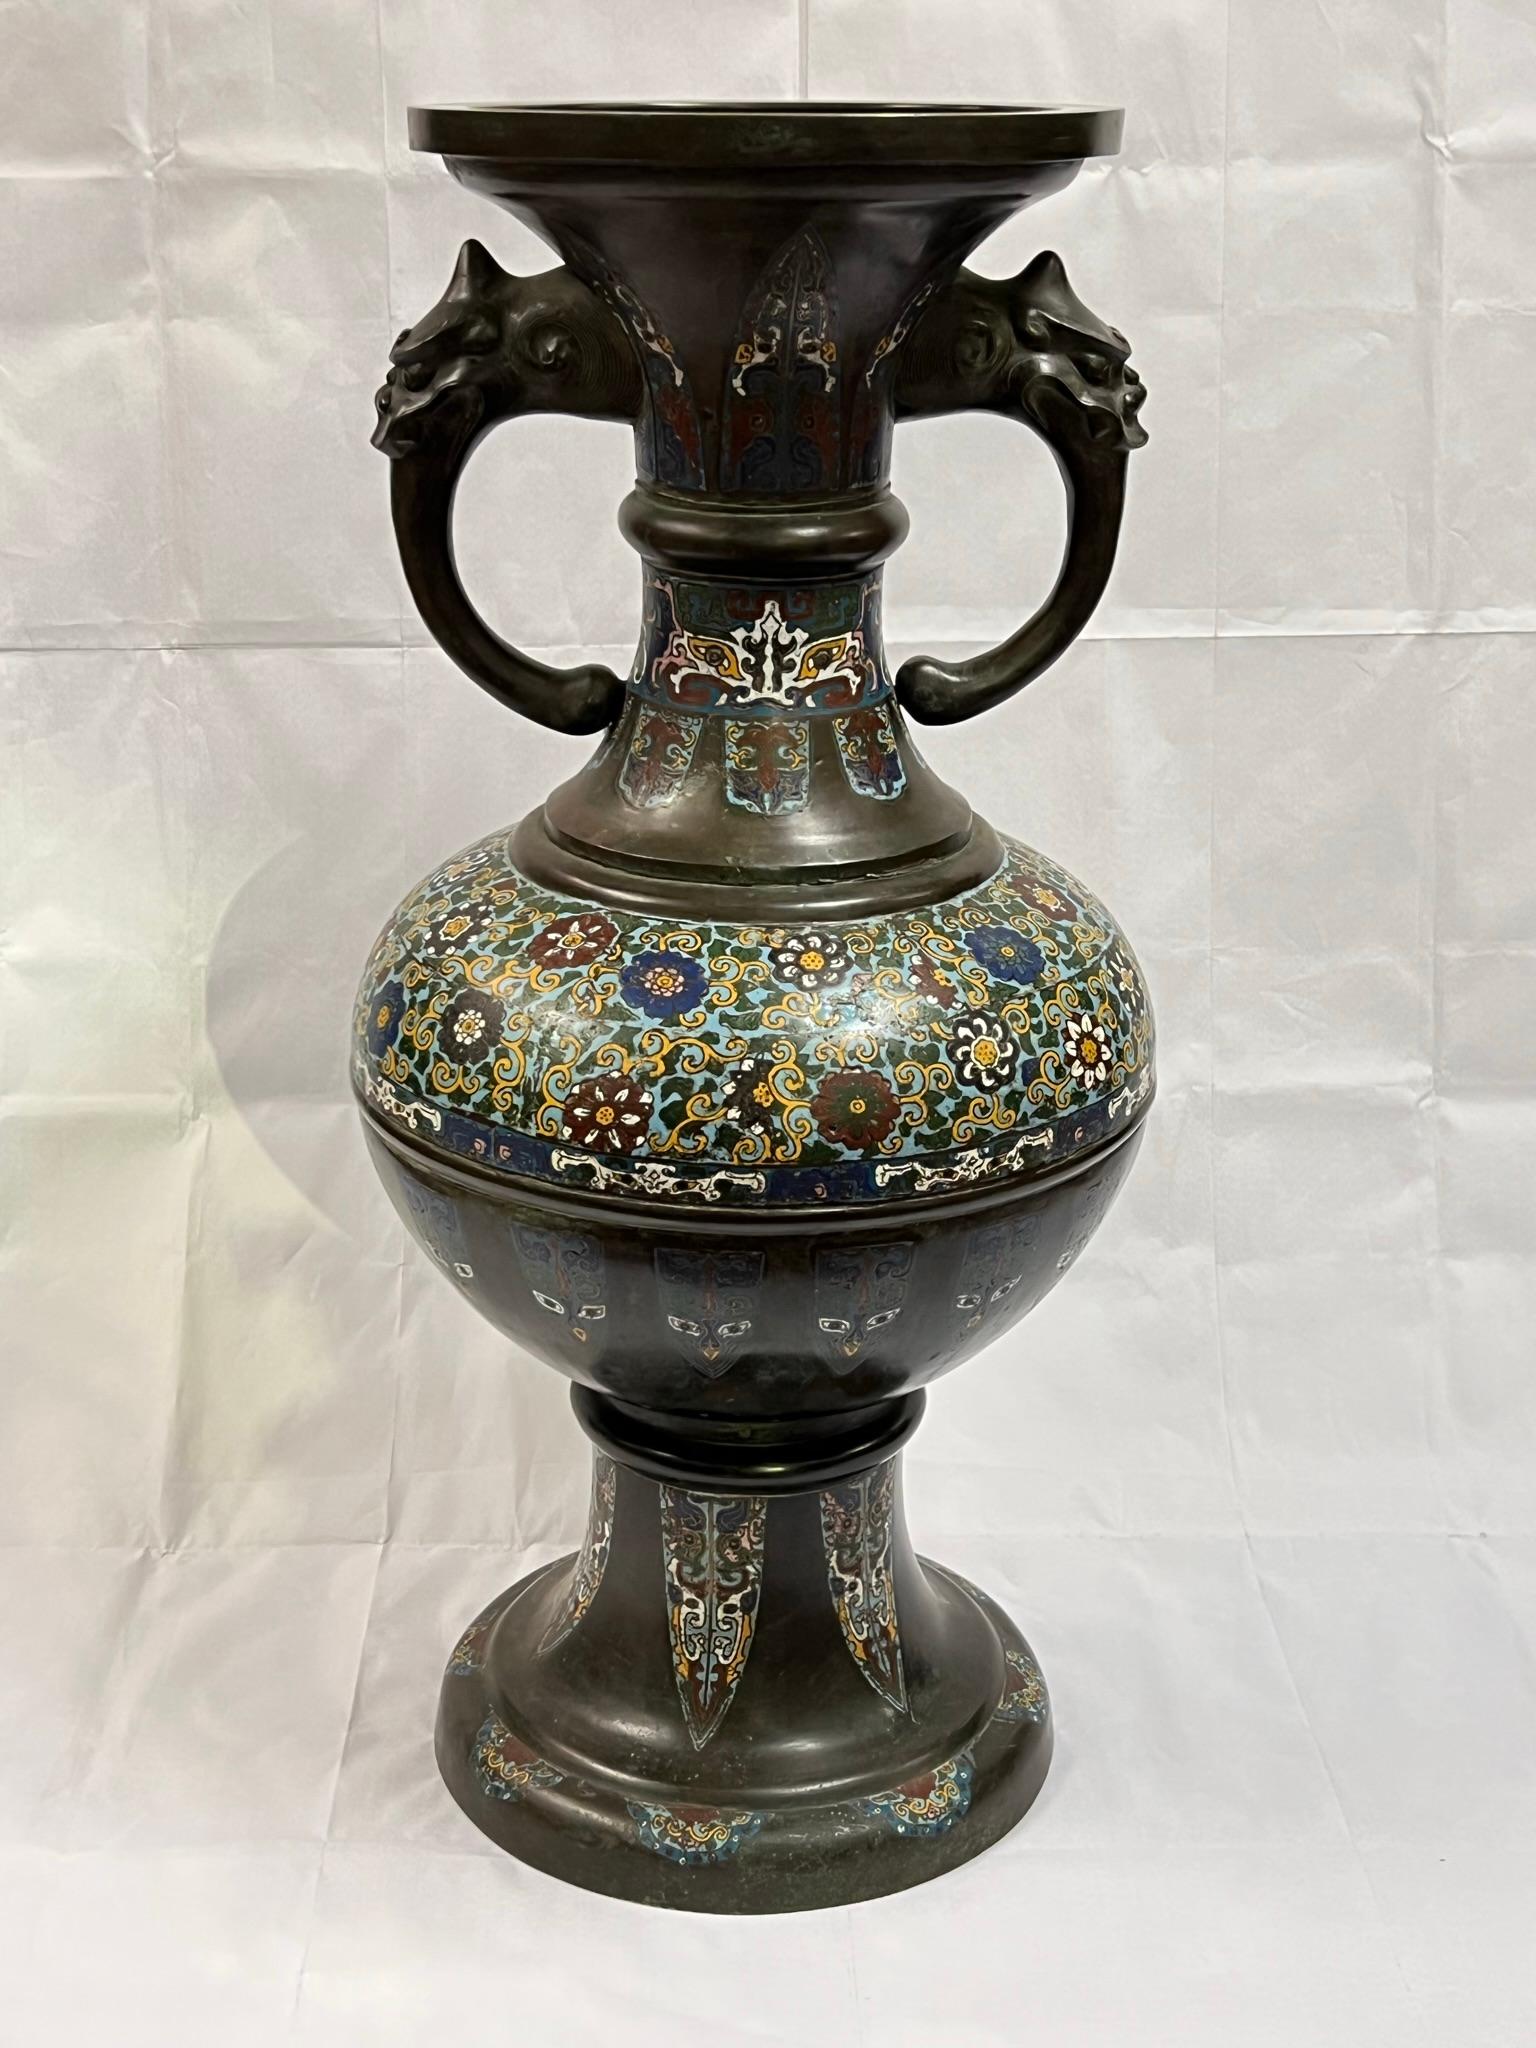 Palace size Antique 19th century Chinese Archaic style Champleve bronze floor vase.